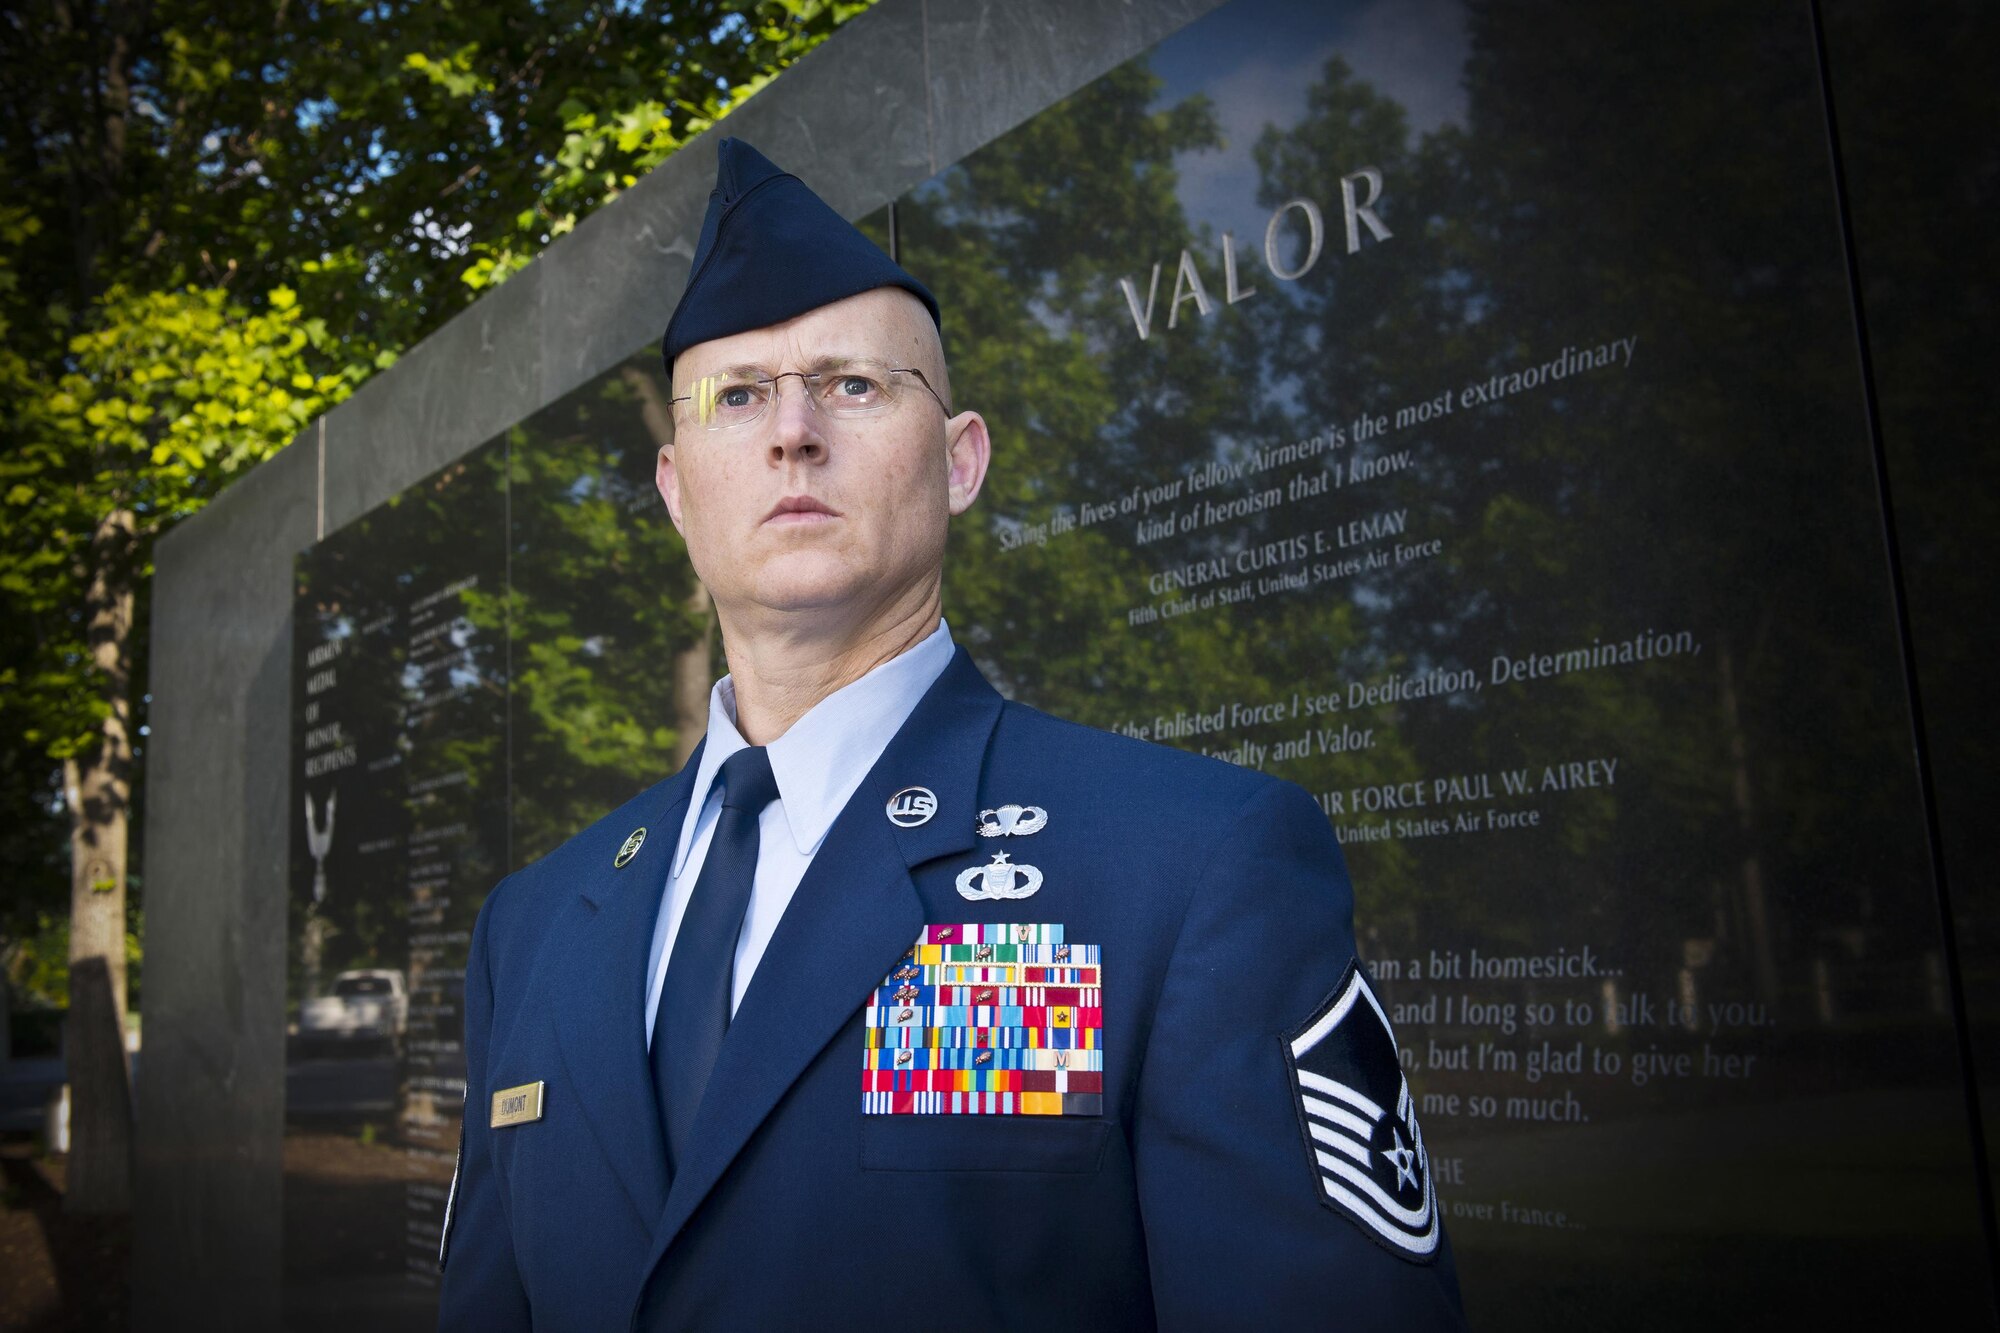 Master Sgt. Thomas DuMont, the Air National Guard's 2016 Outstanding Senior Noncommissioned Officer of the Year, poses for a photo at the Air Force Memorial in Washington D.C., May 31, 2017. DuMont is assigned to the 157th Air Operations Group, Missouri ANG, and was chosen for the honor among all Senior NCOs across the Air National Guard.